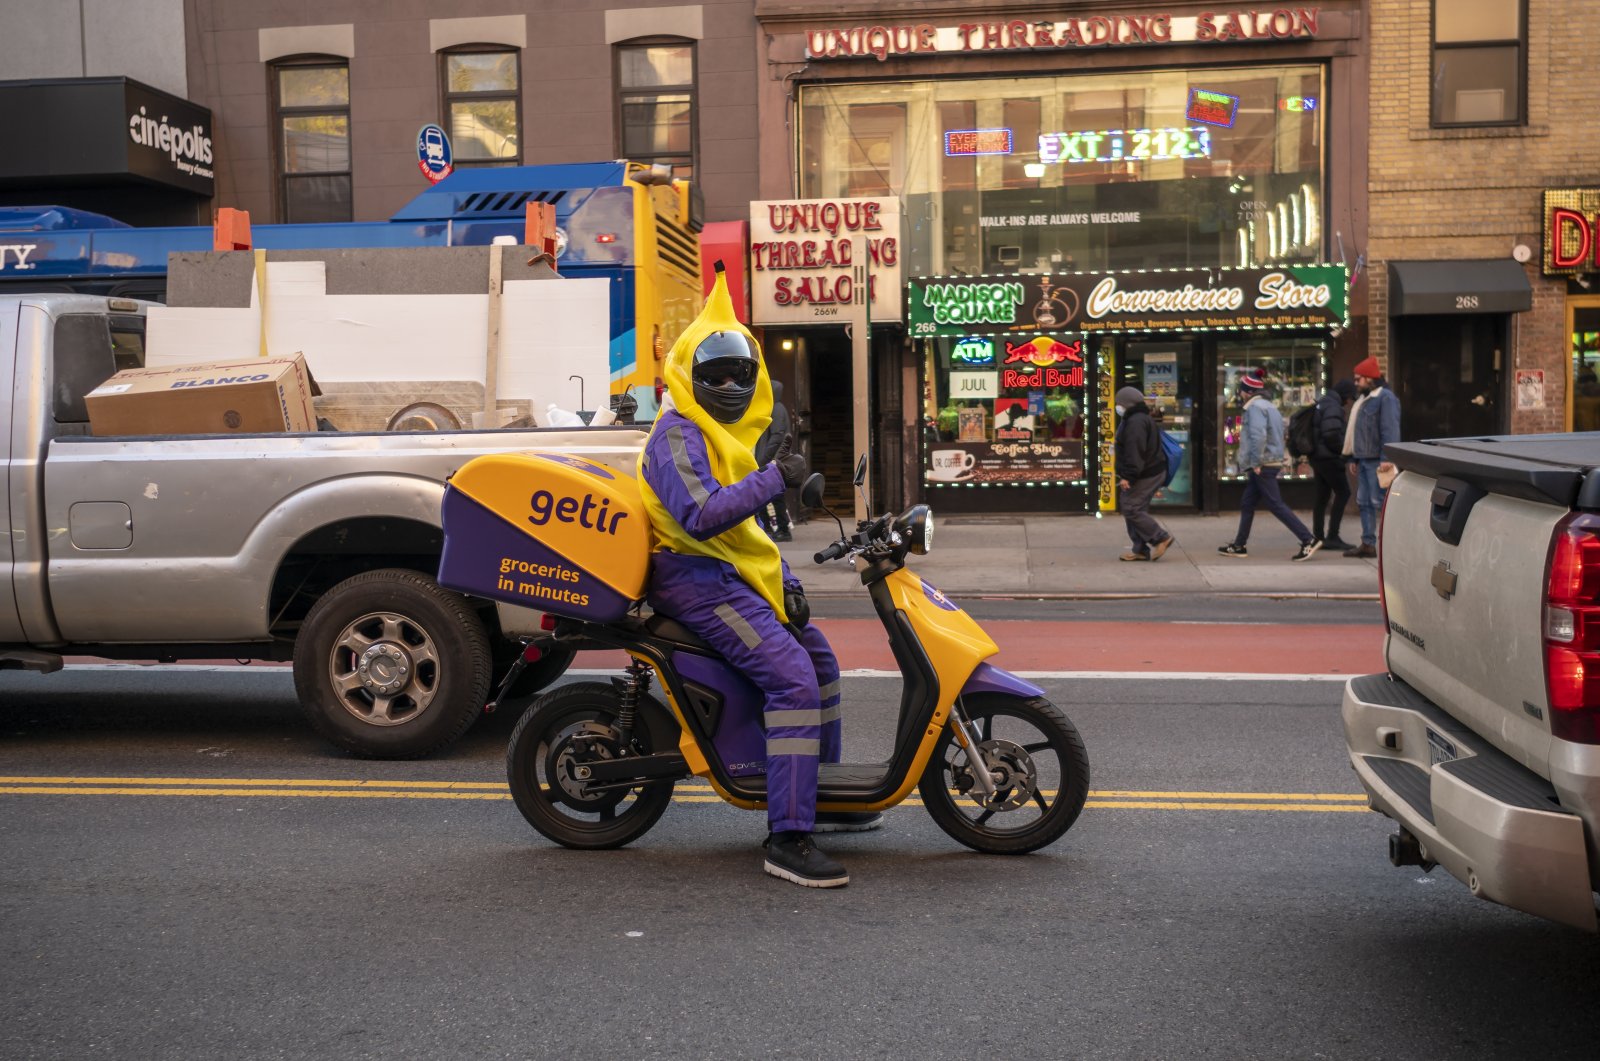 A worker for the Turkish superfast grocery delivery service Getir is photographed on his e-bike in Chelsea, New York, U.S., Nov. 18, 2022. (Reuters Photo)